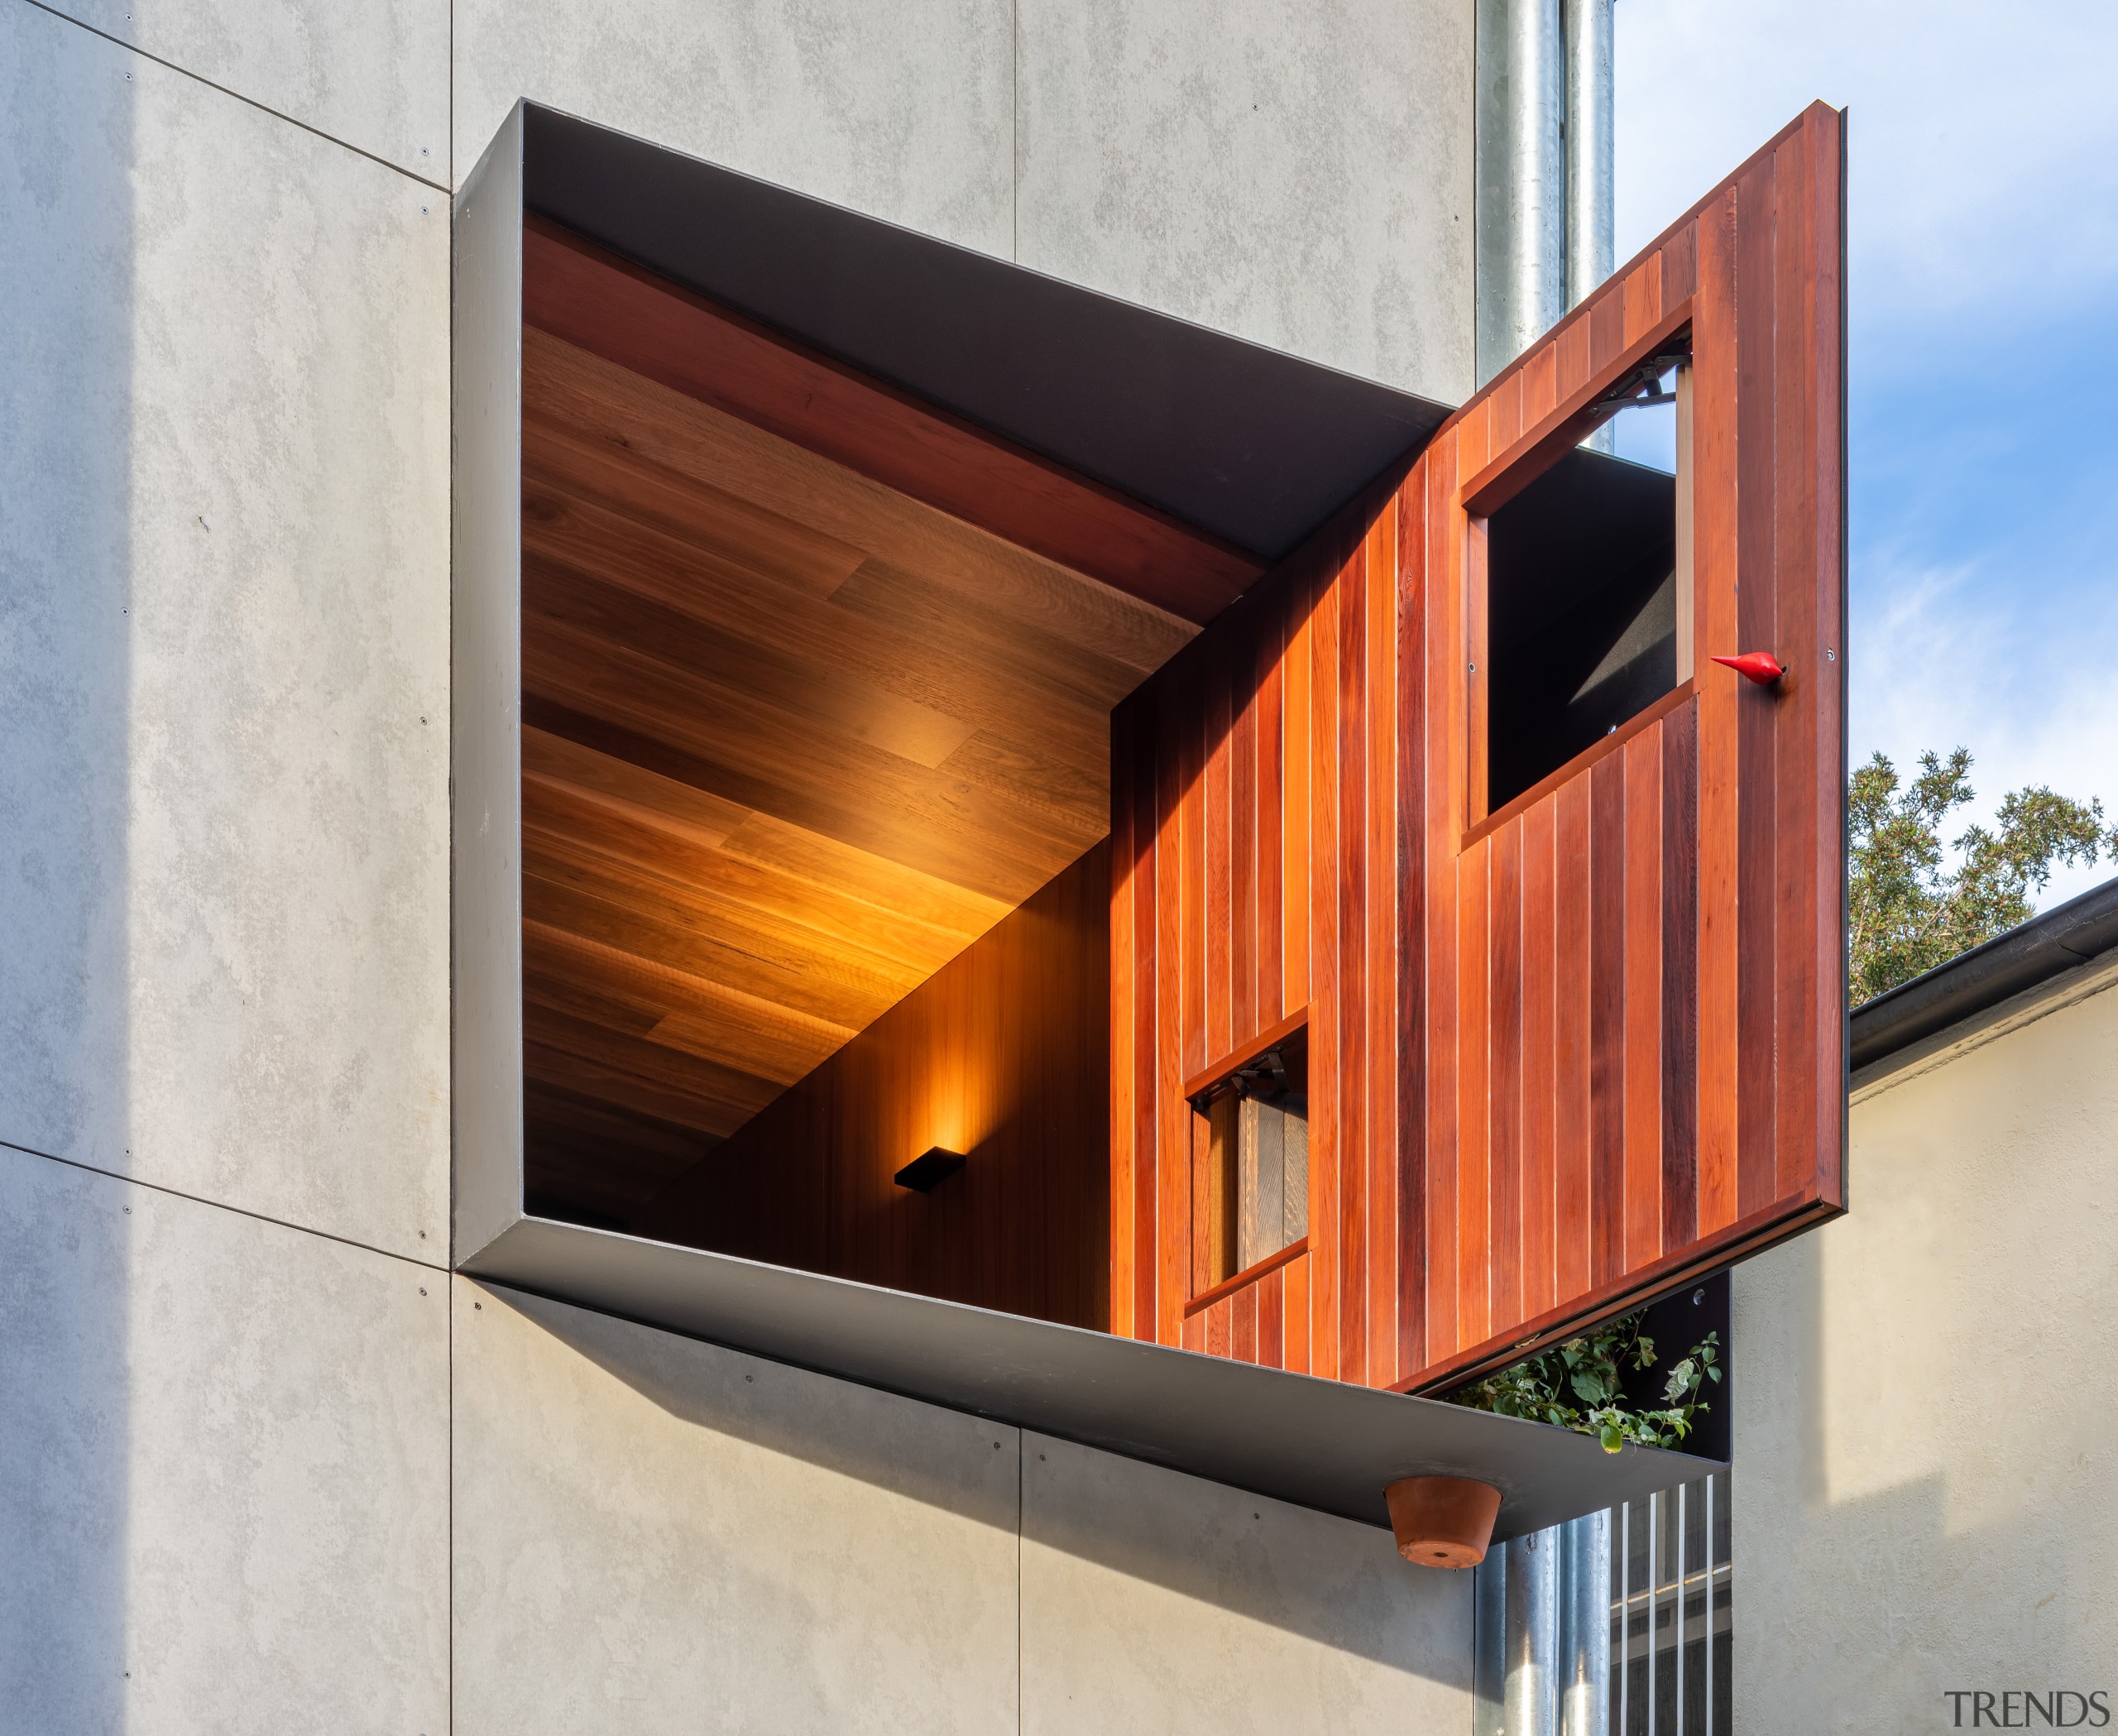 4 WELCOME TO THE JUNGLE HOUSE - architecture architecture, balcony, building, concrete, design, facade, glass, home, house, interior design, line, material property, orange, real estate, room, siding, wall, window, wood, gray